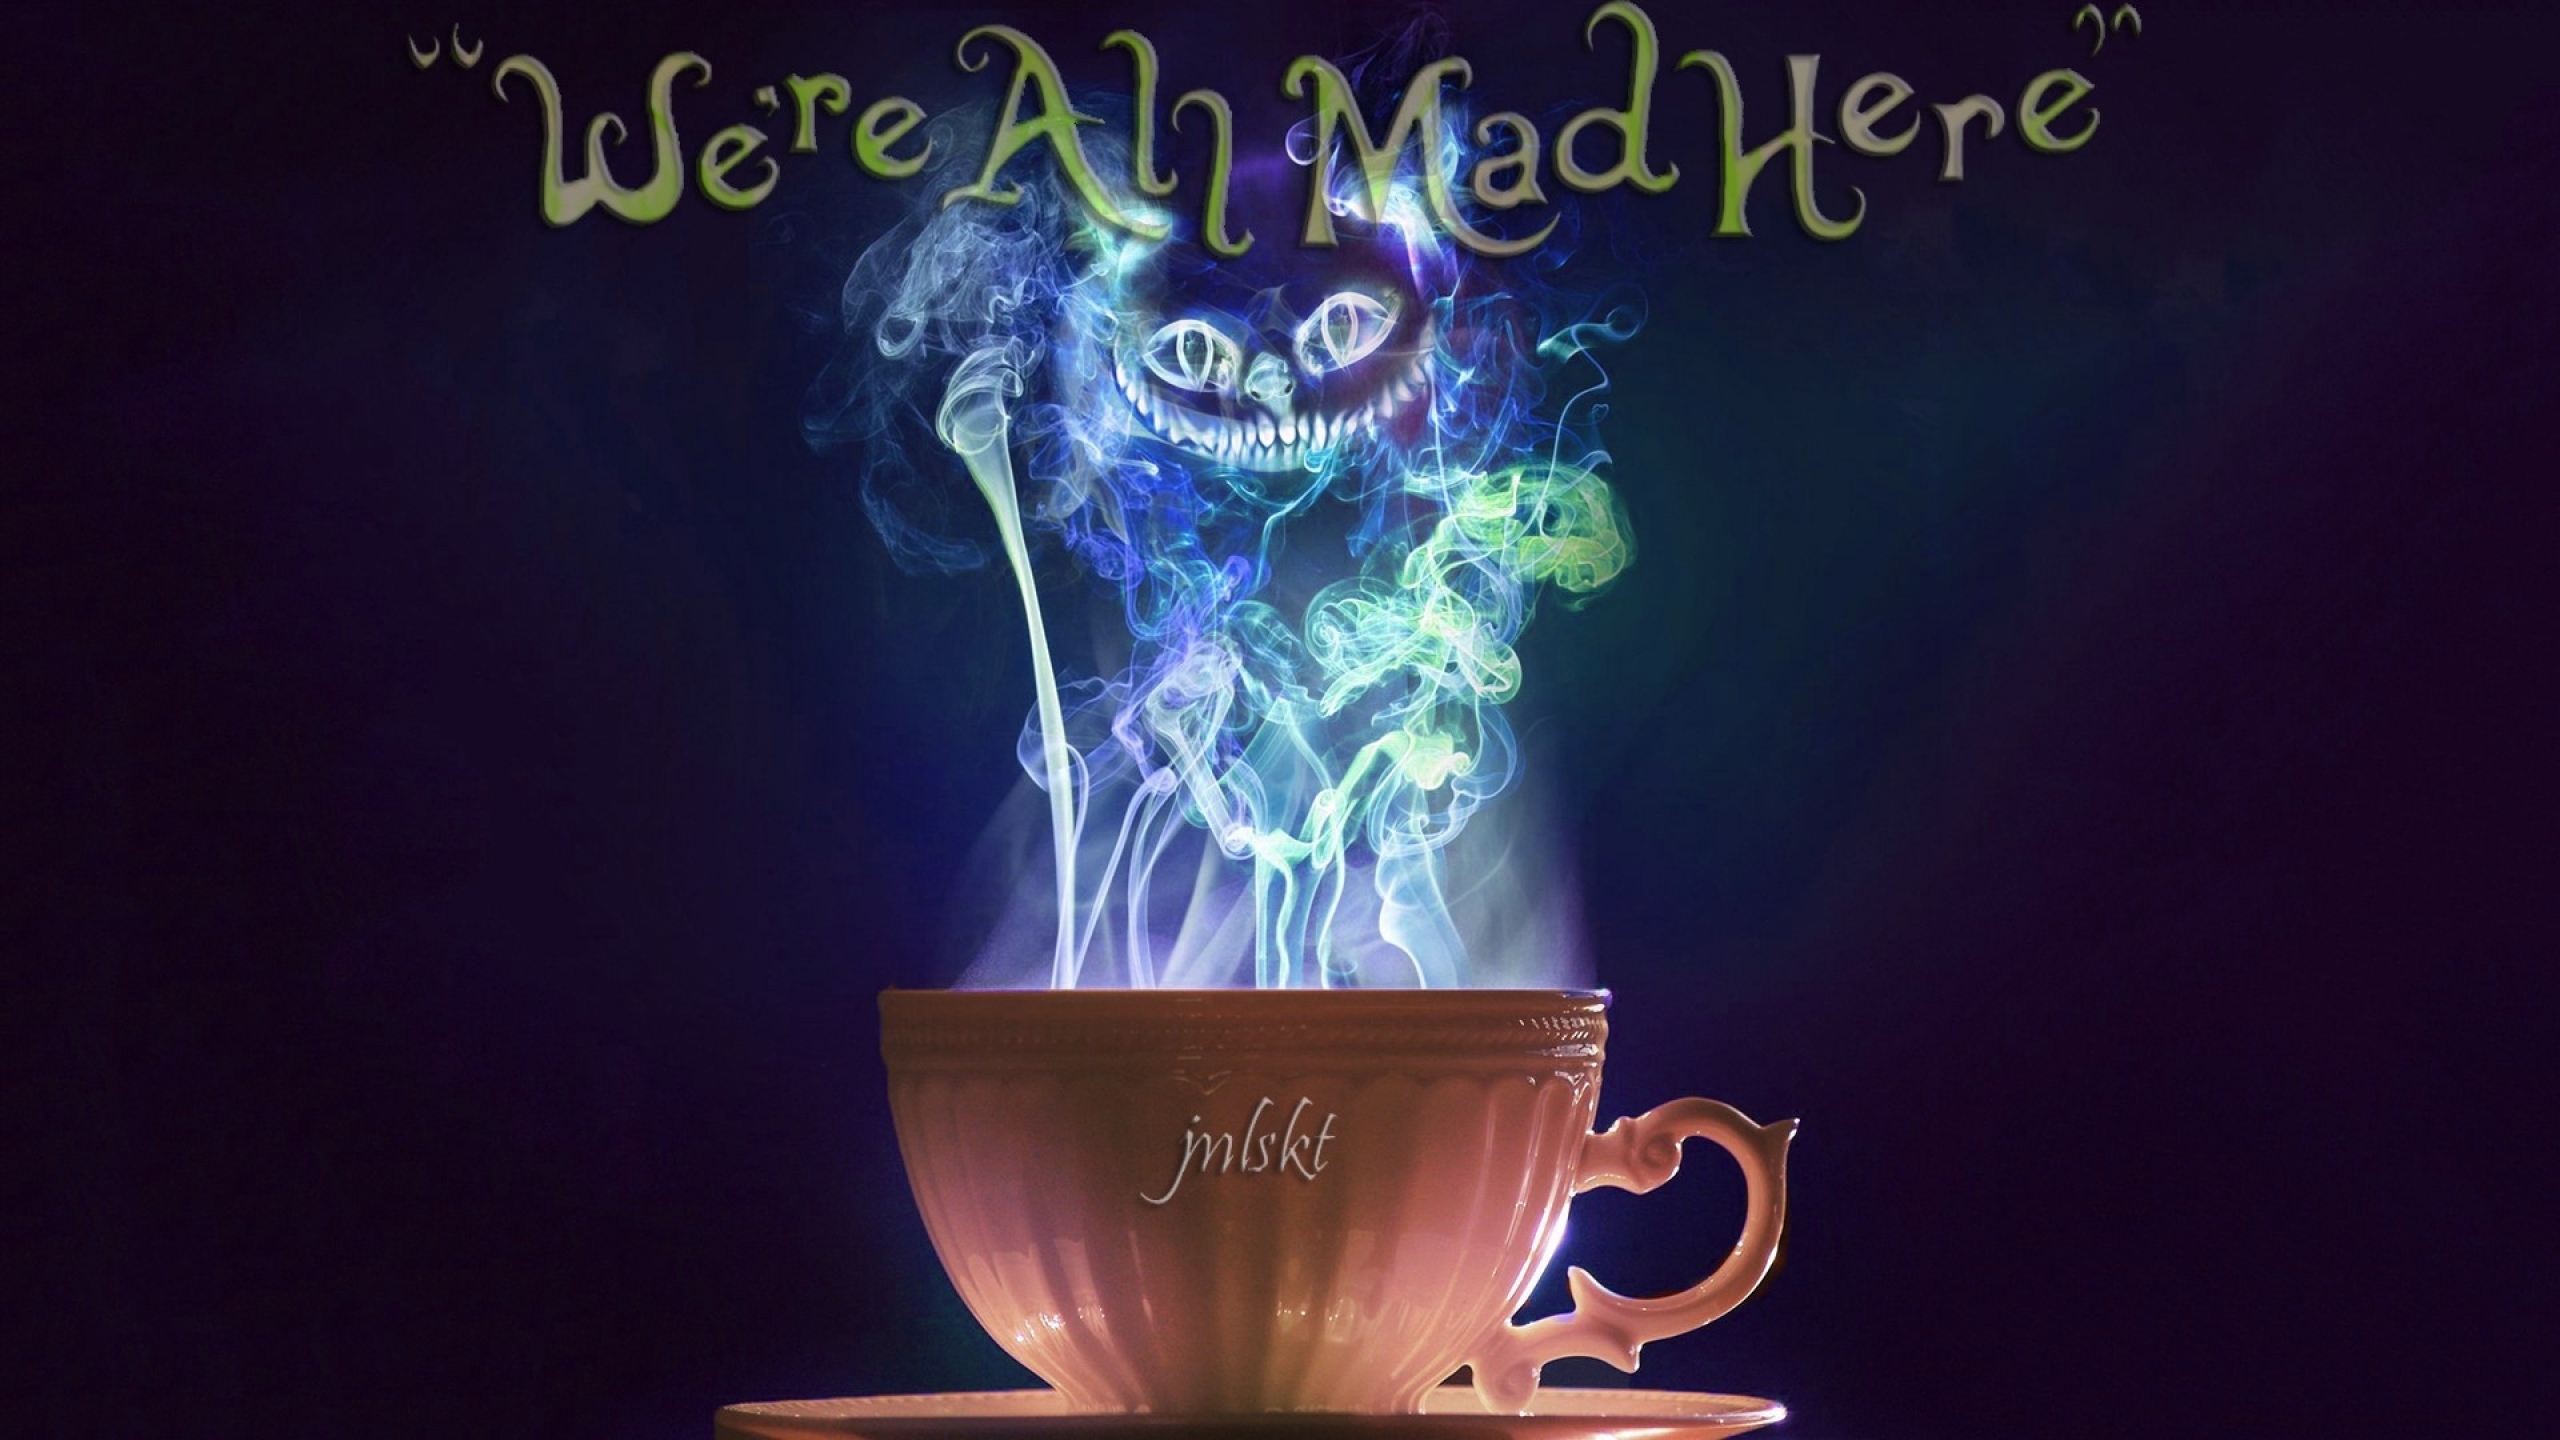 We Re All Mad Here Wallpaper Fitrinis Wallpaper